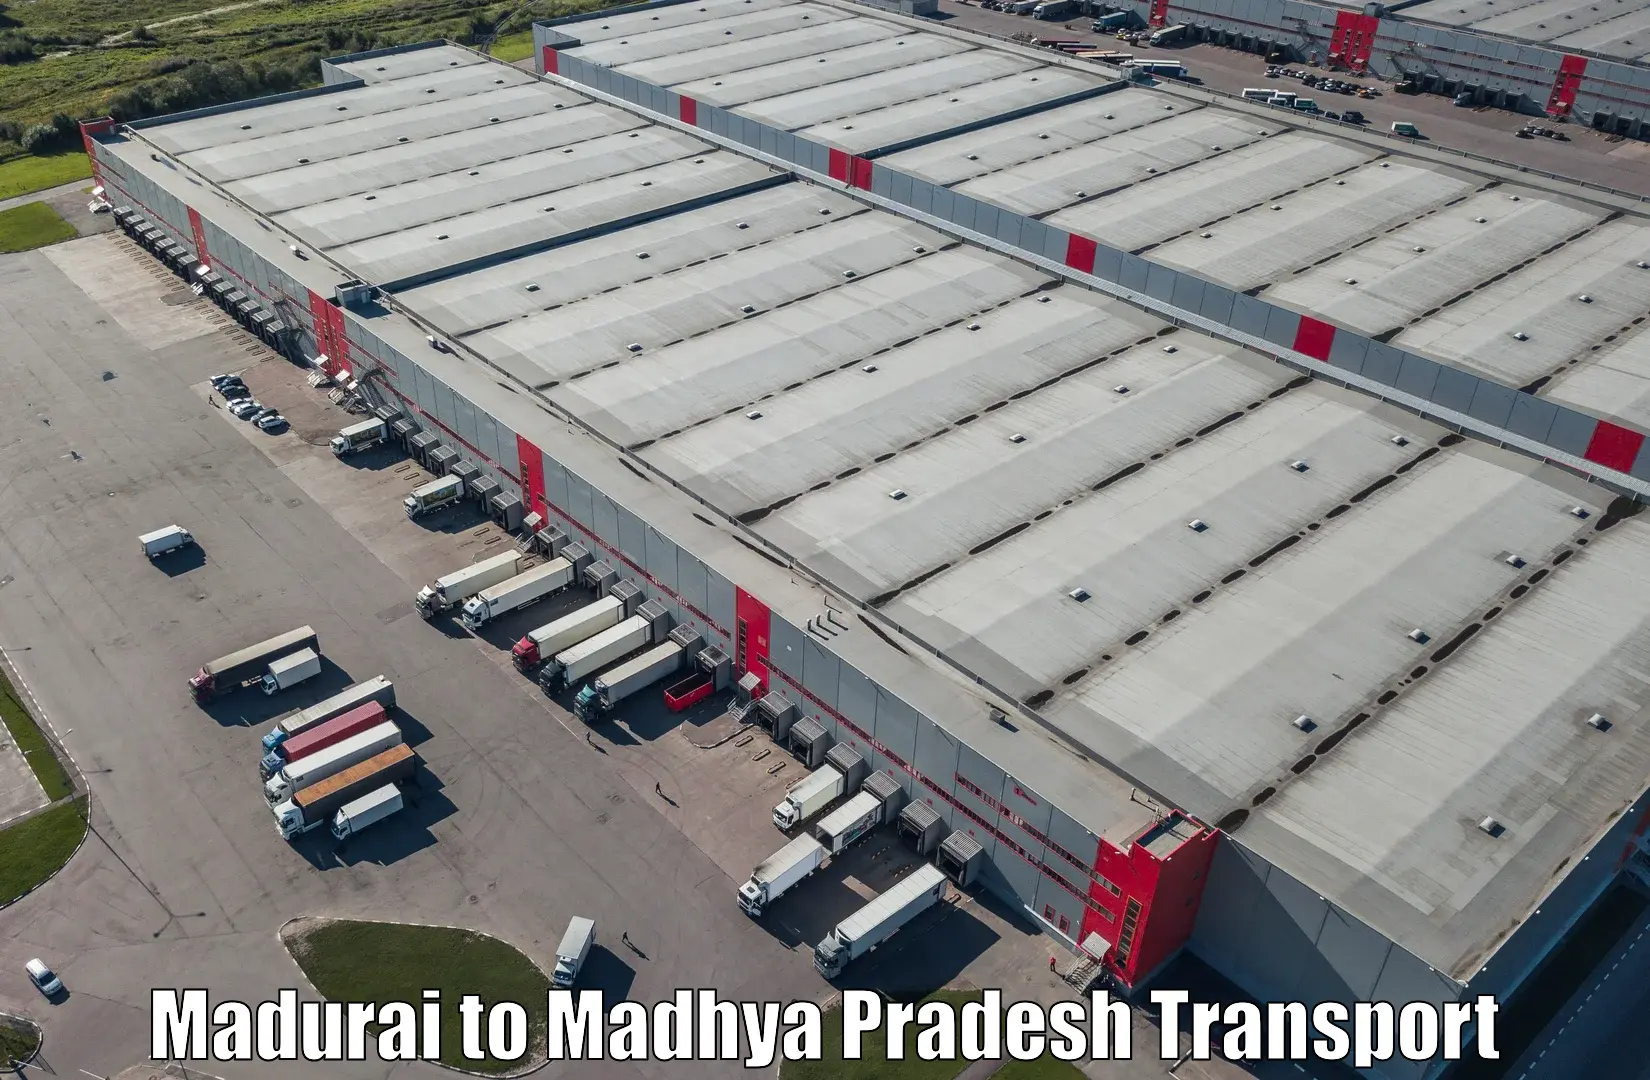 Air freight transport services Madurai to Deosar